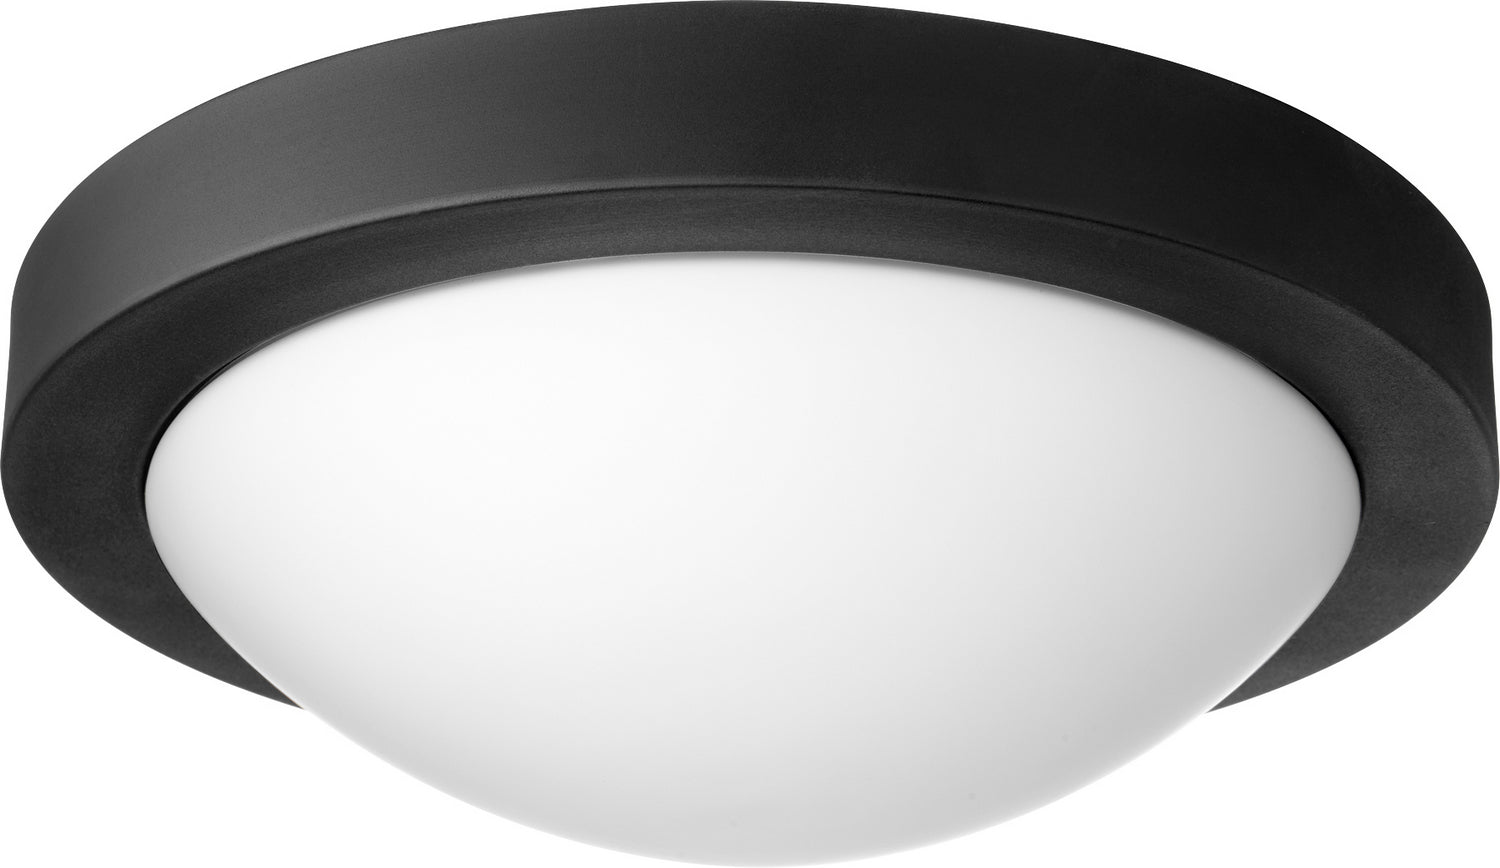 Quorum - 3505-13-69 - Two Light Wall Mount - 3505 Contempo Ceiling Mounts - Textured Black